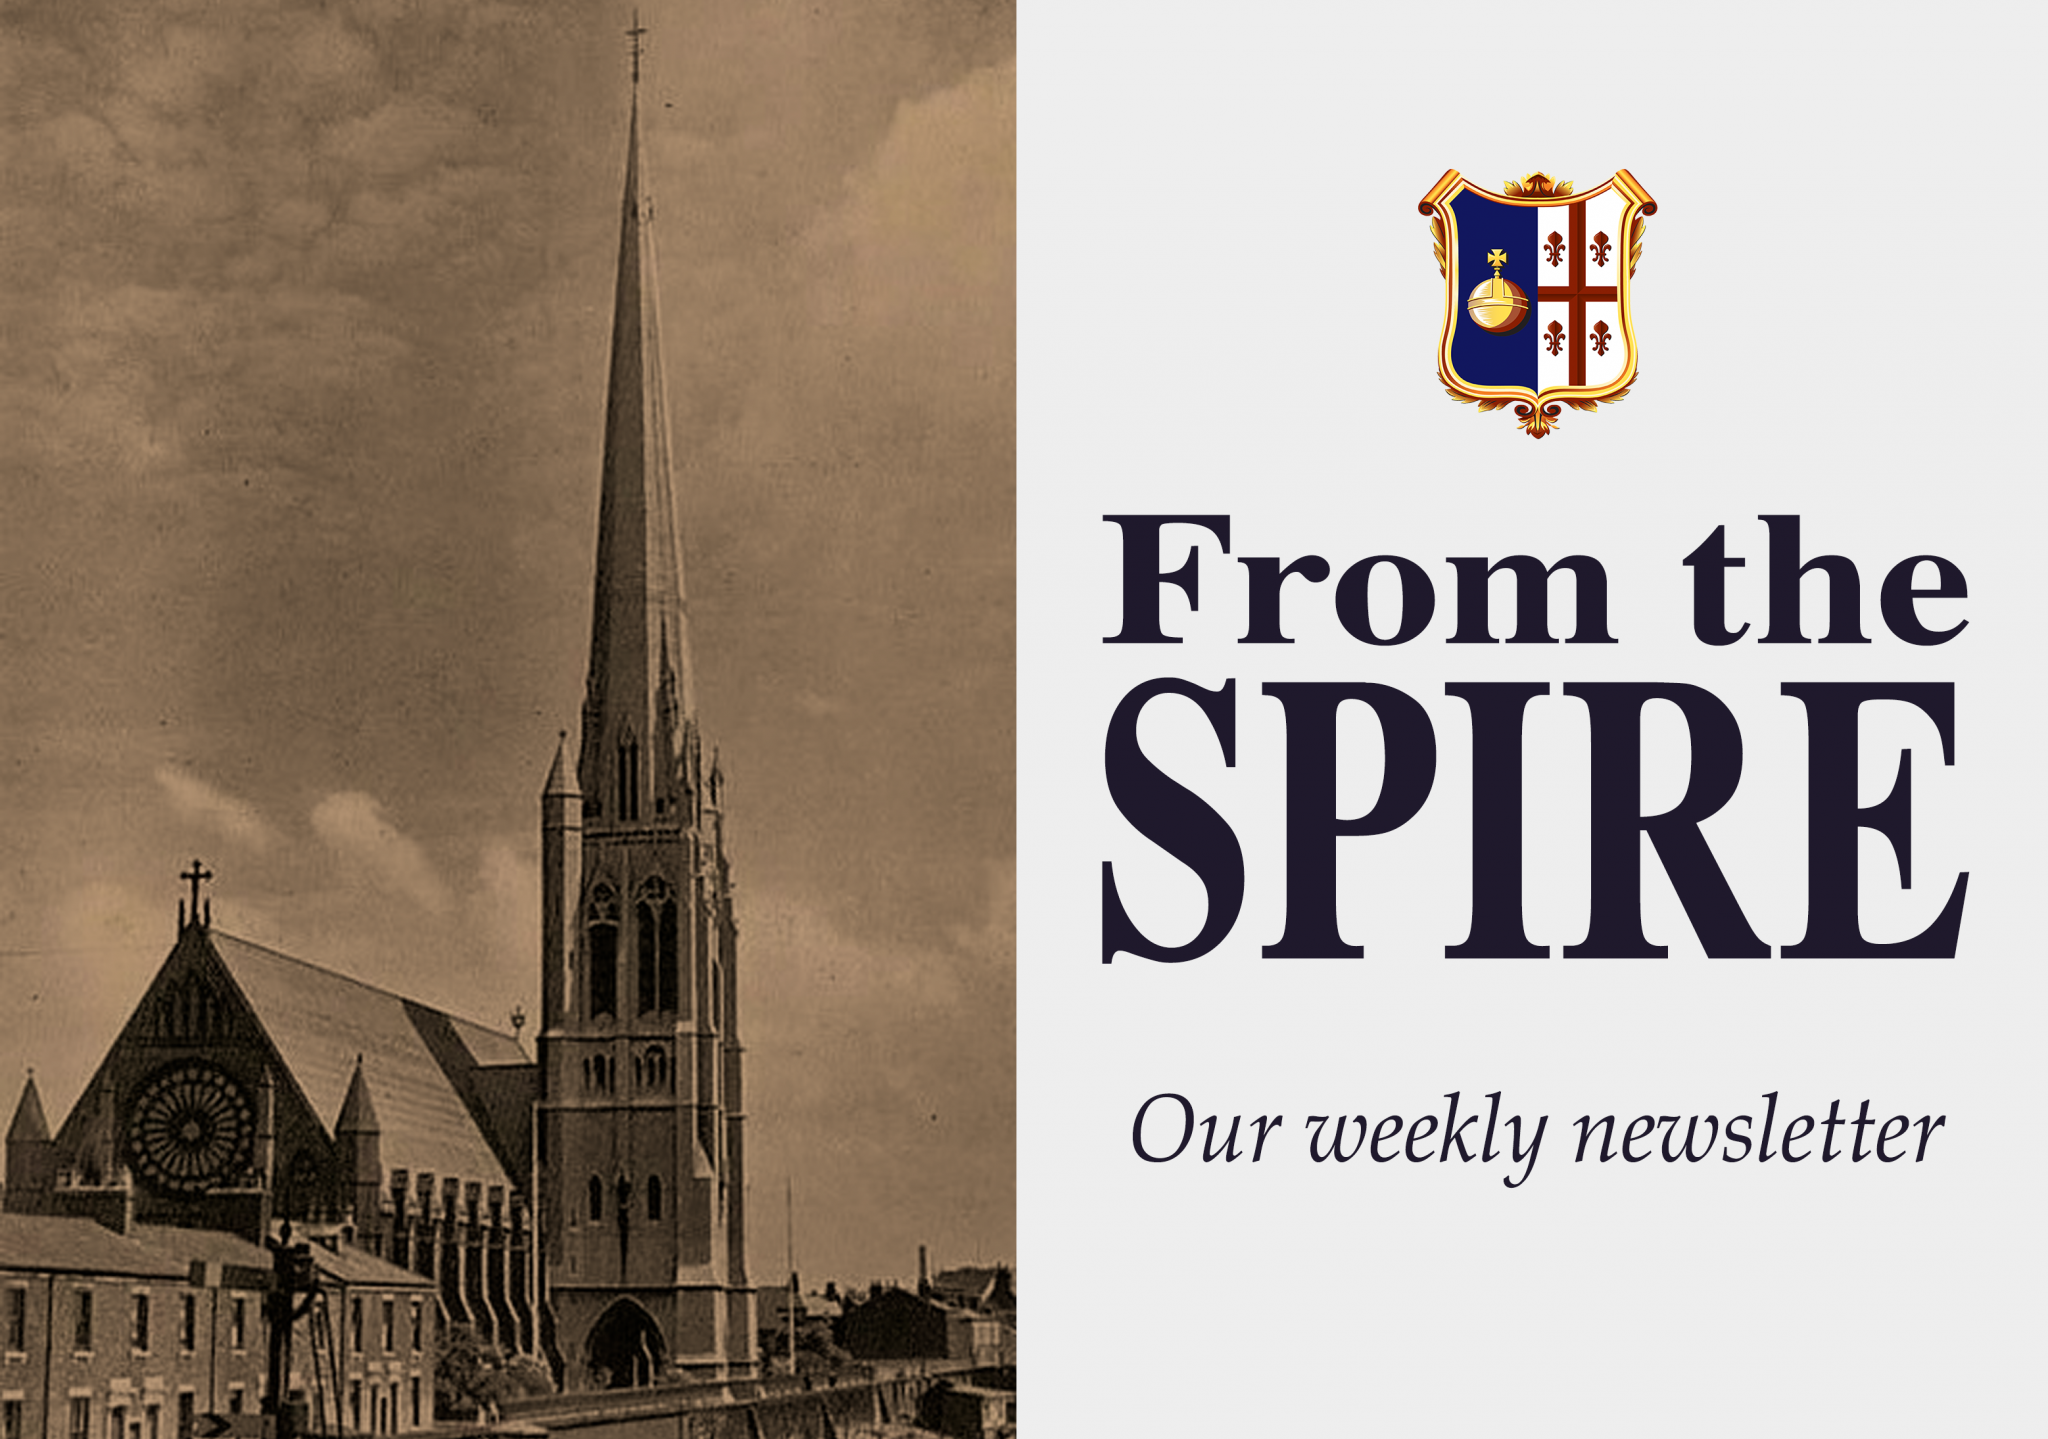 Newsletter for the Fourth Sunday after Pentecost - The Spire & The Martyrs